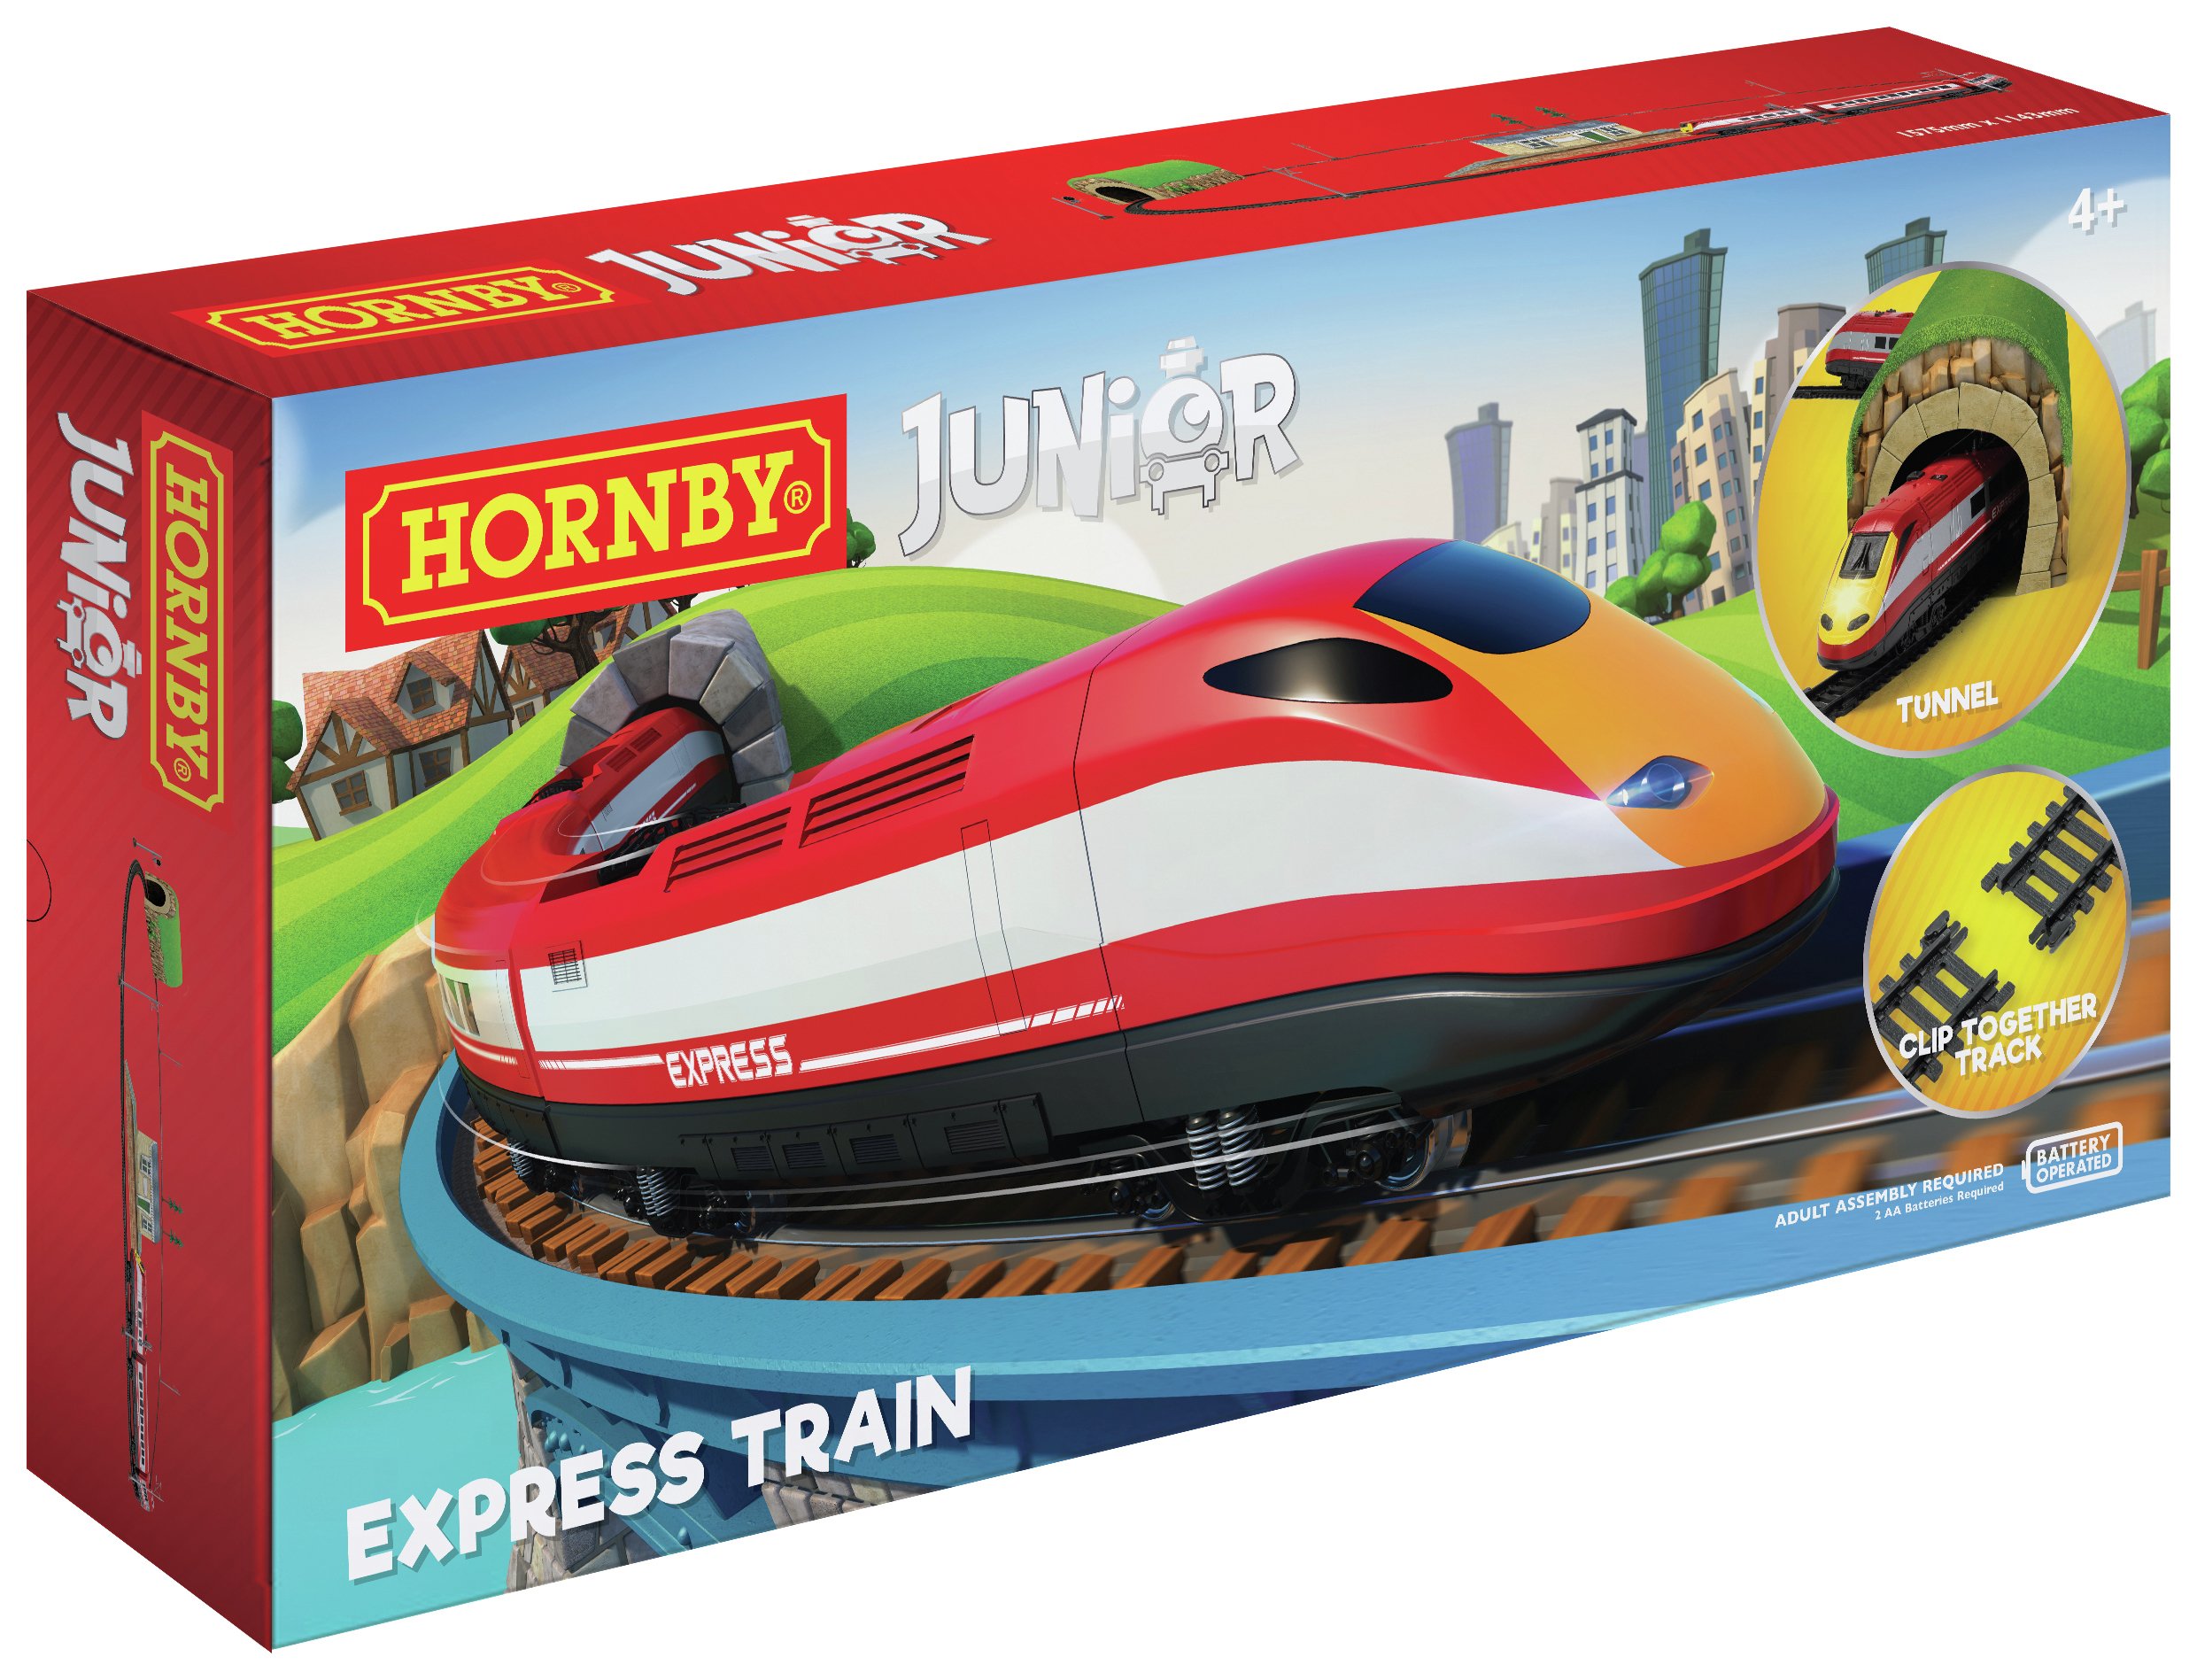 Hornby My First Express Train